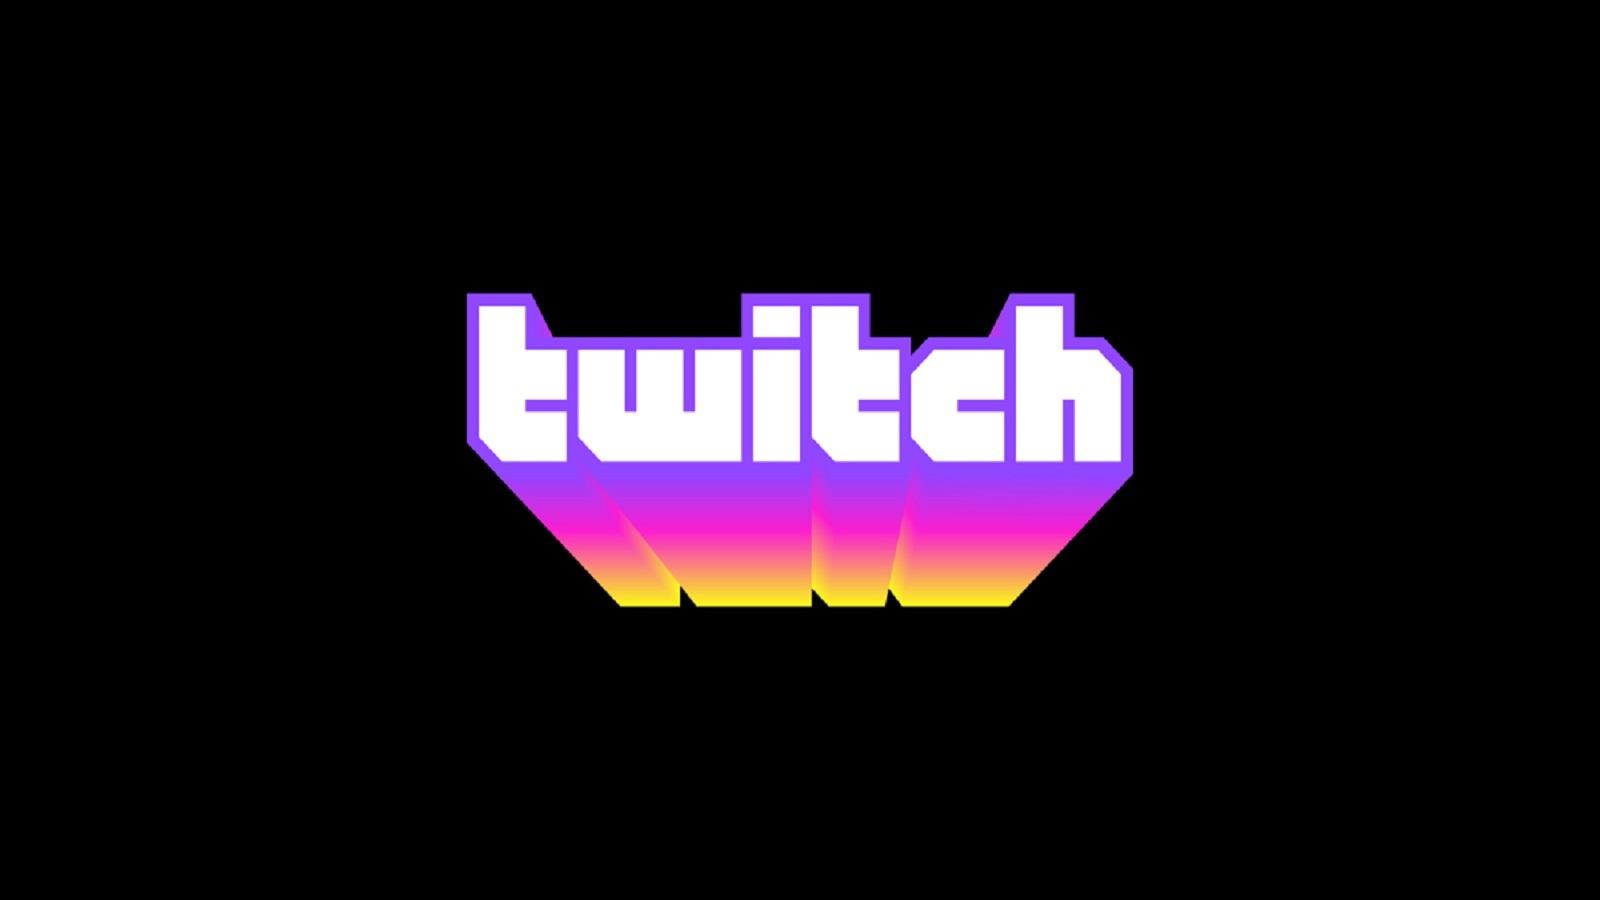 An image of the Twitch Logo displayed on a black background